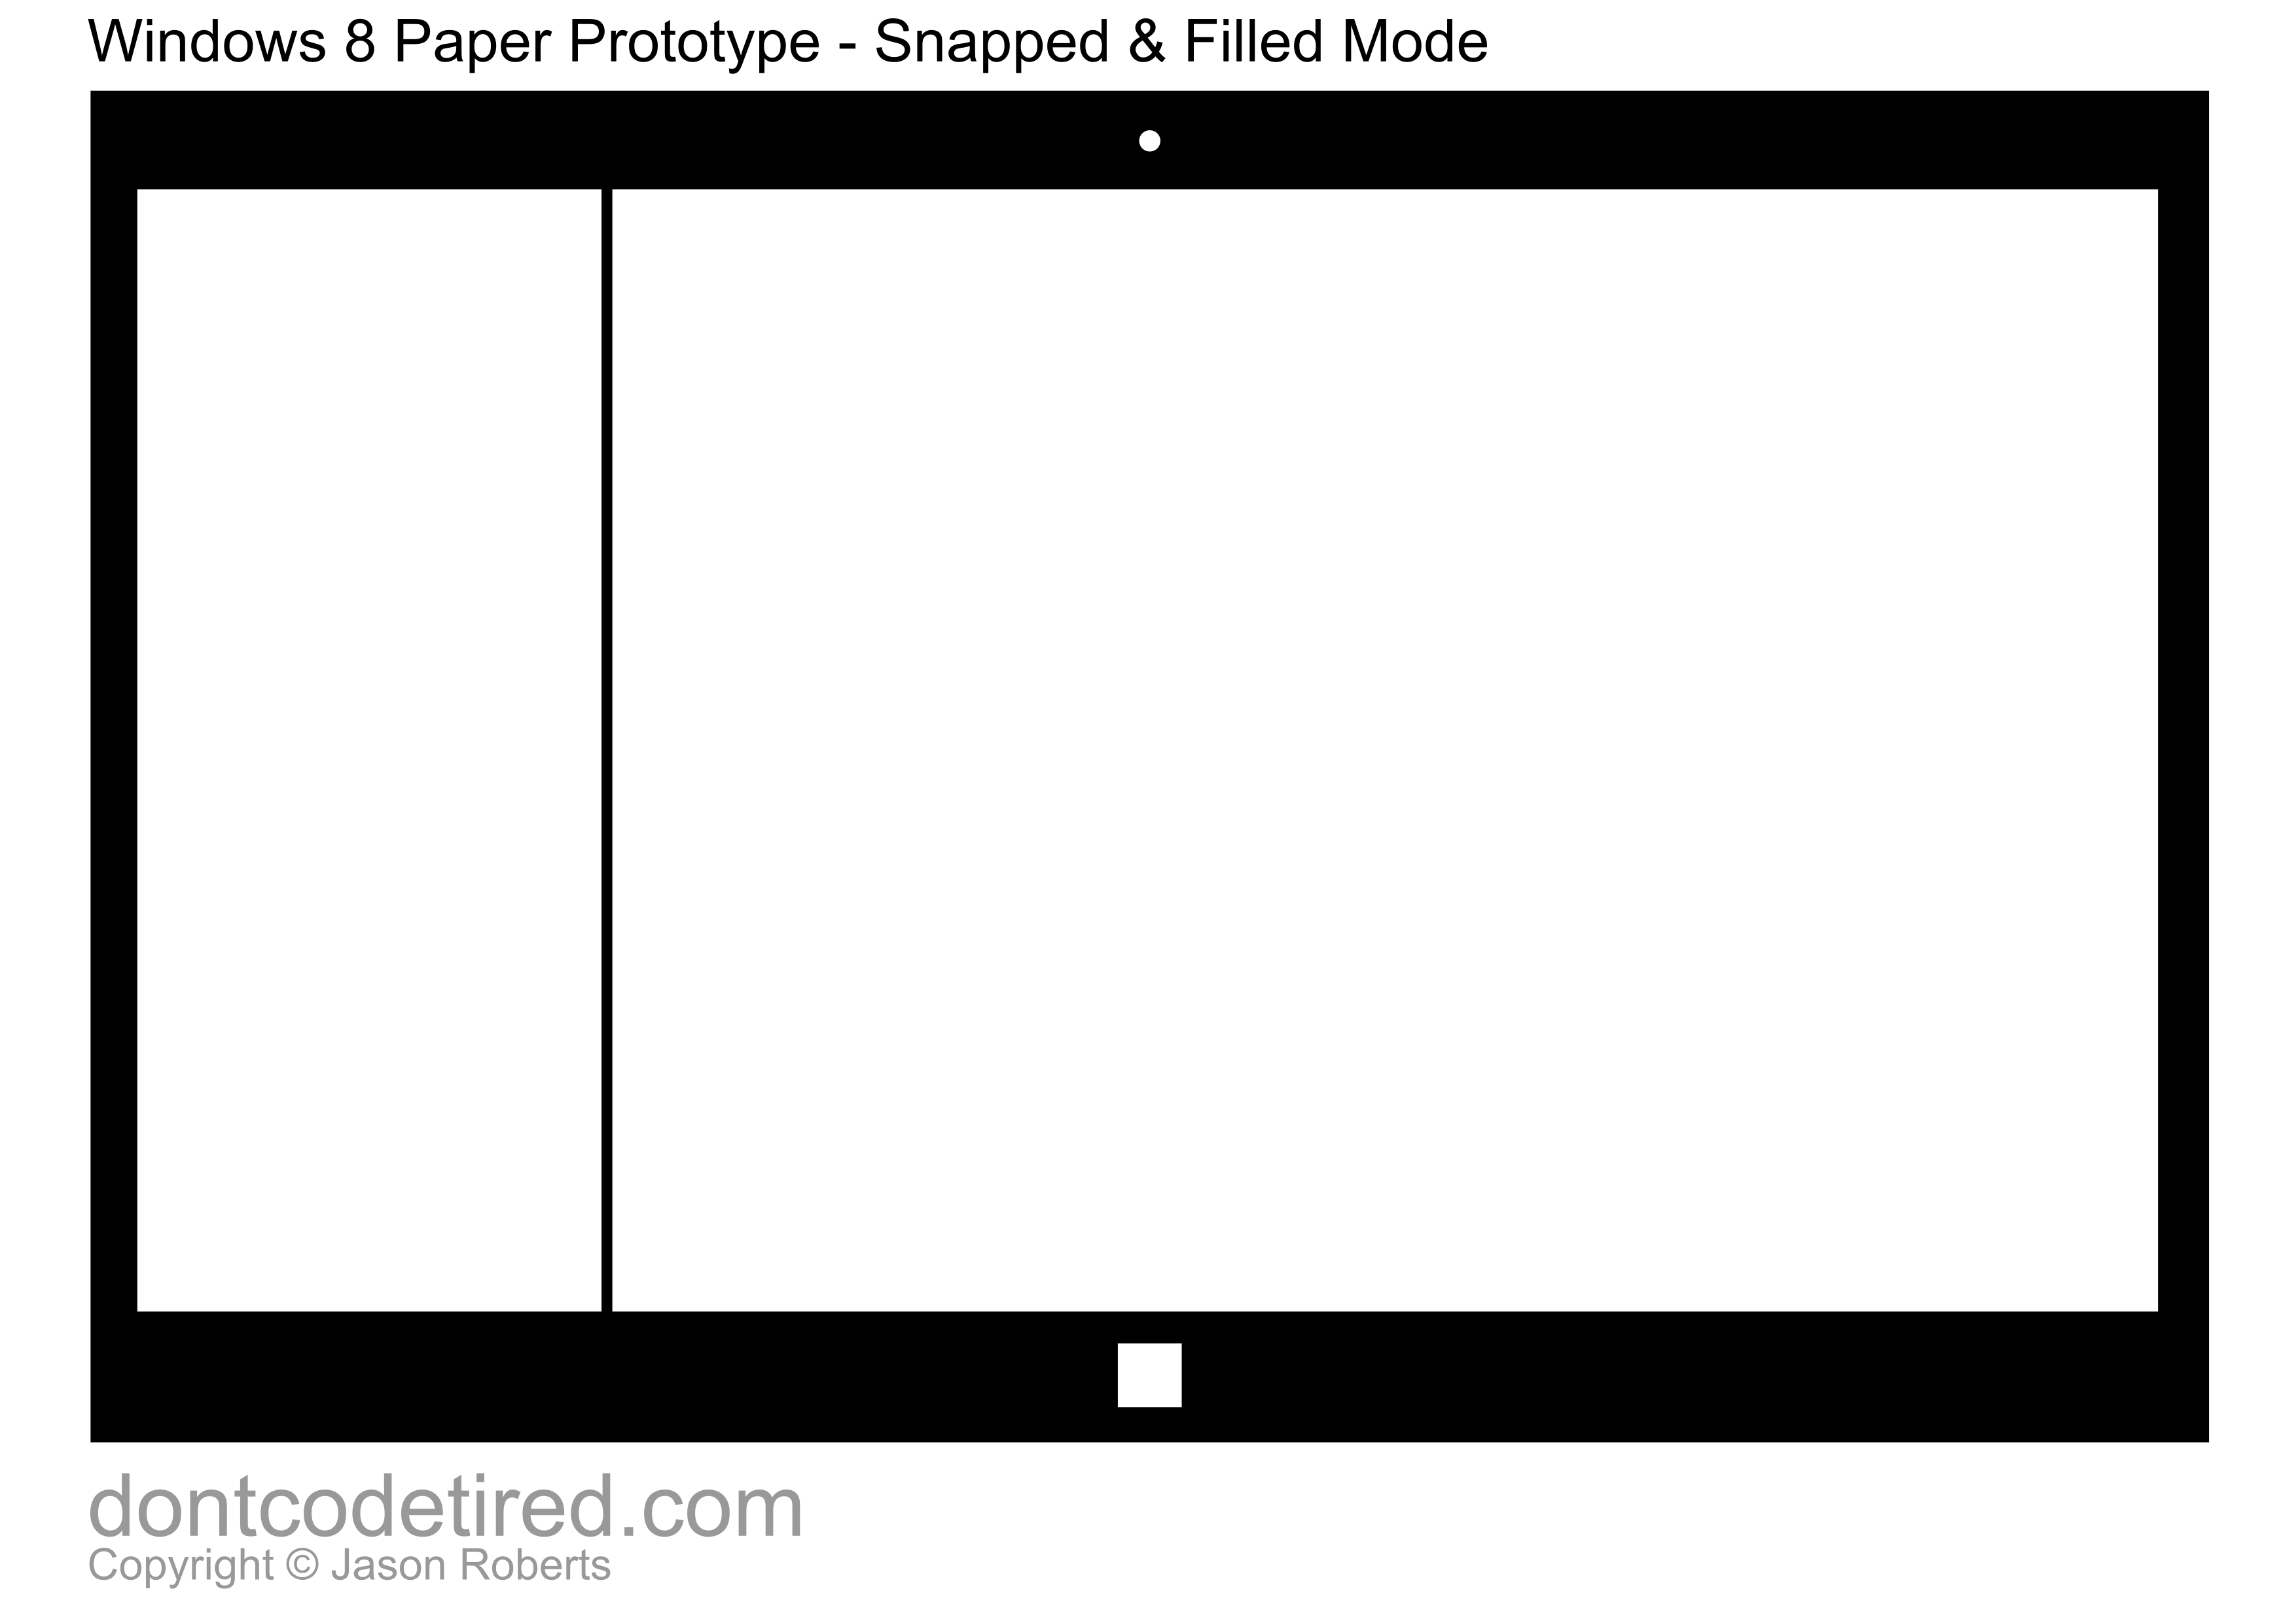 Windows 8 Paper Prototype template - snapped and filled modes